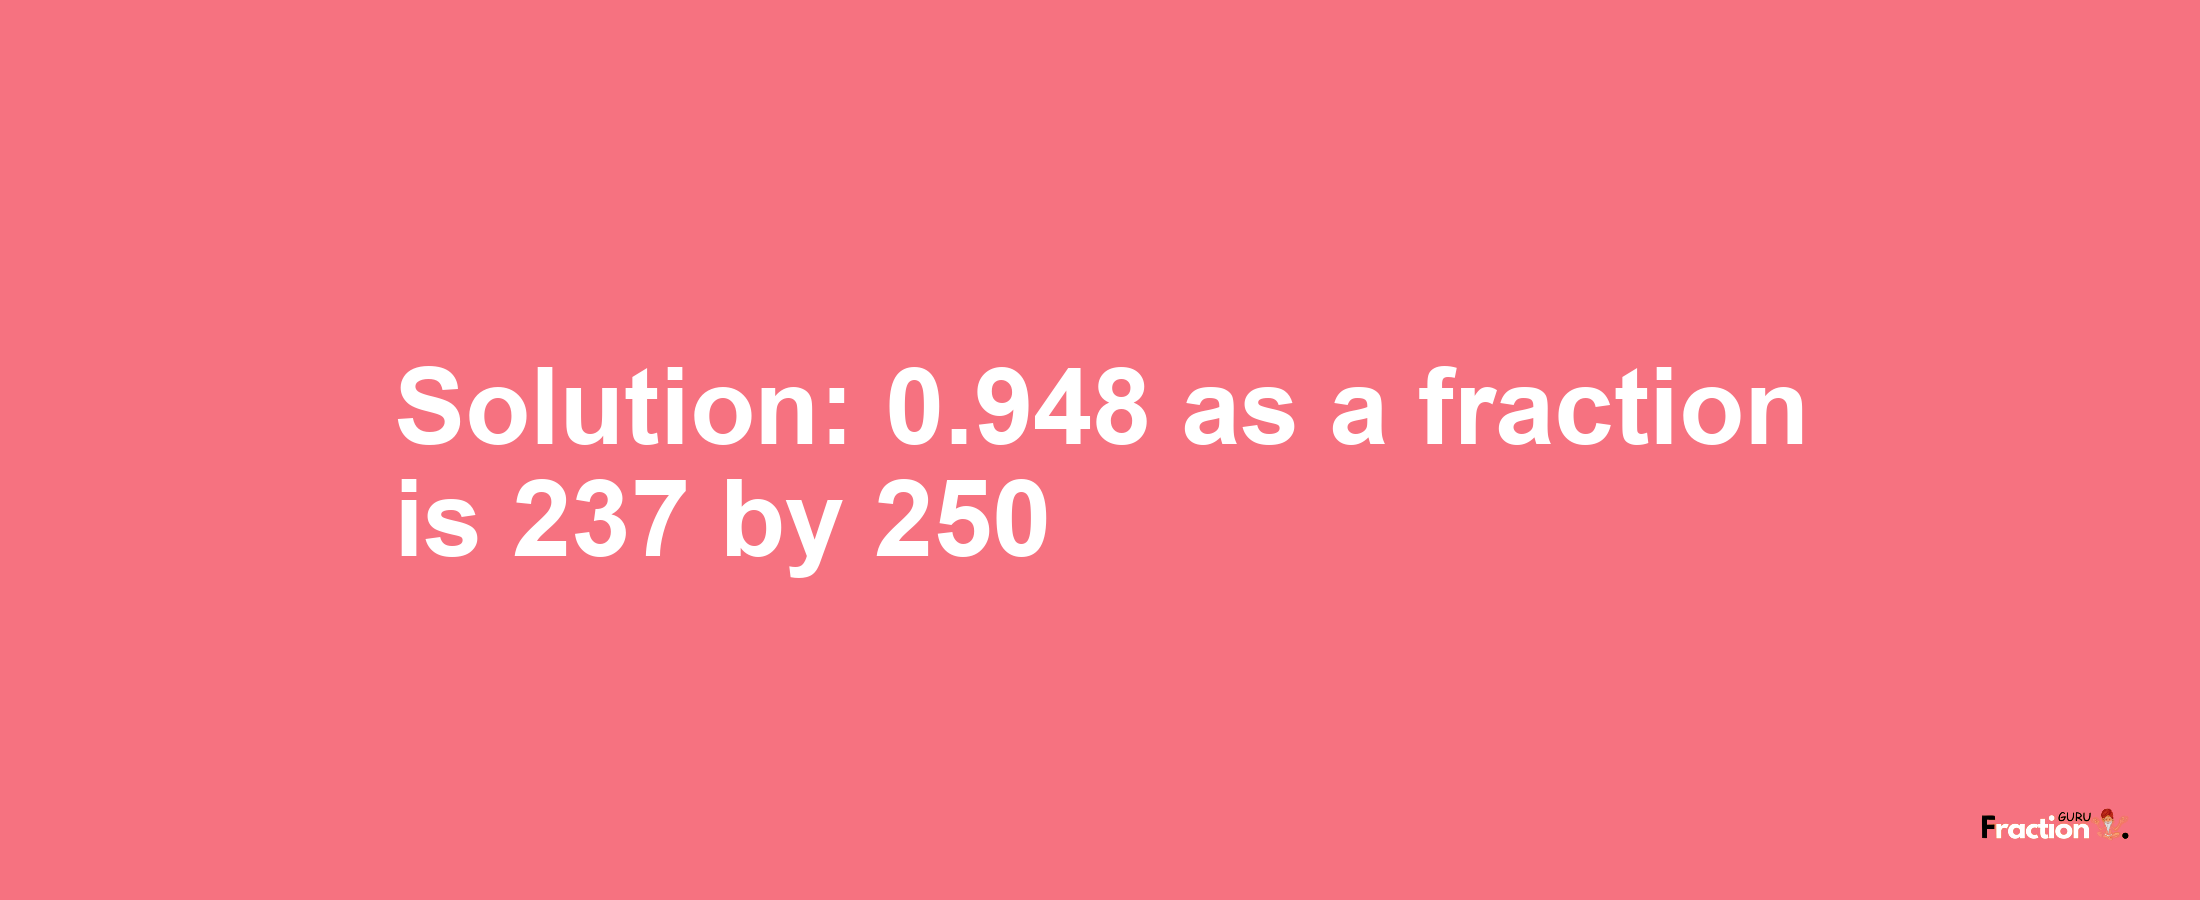 Solution:0.948 as a fraction is 237/250